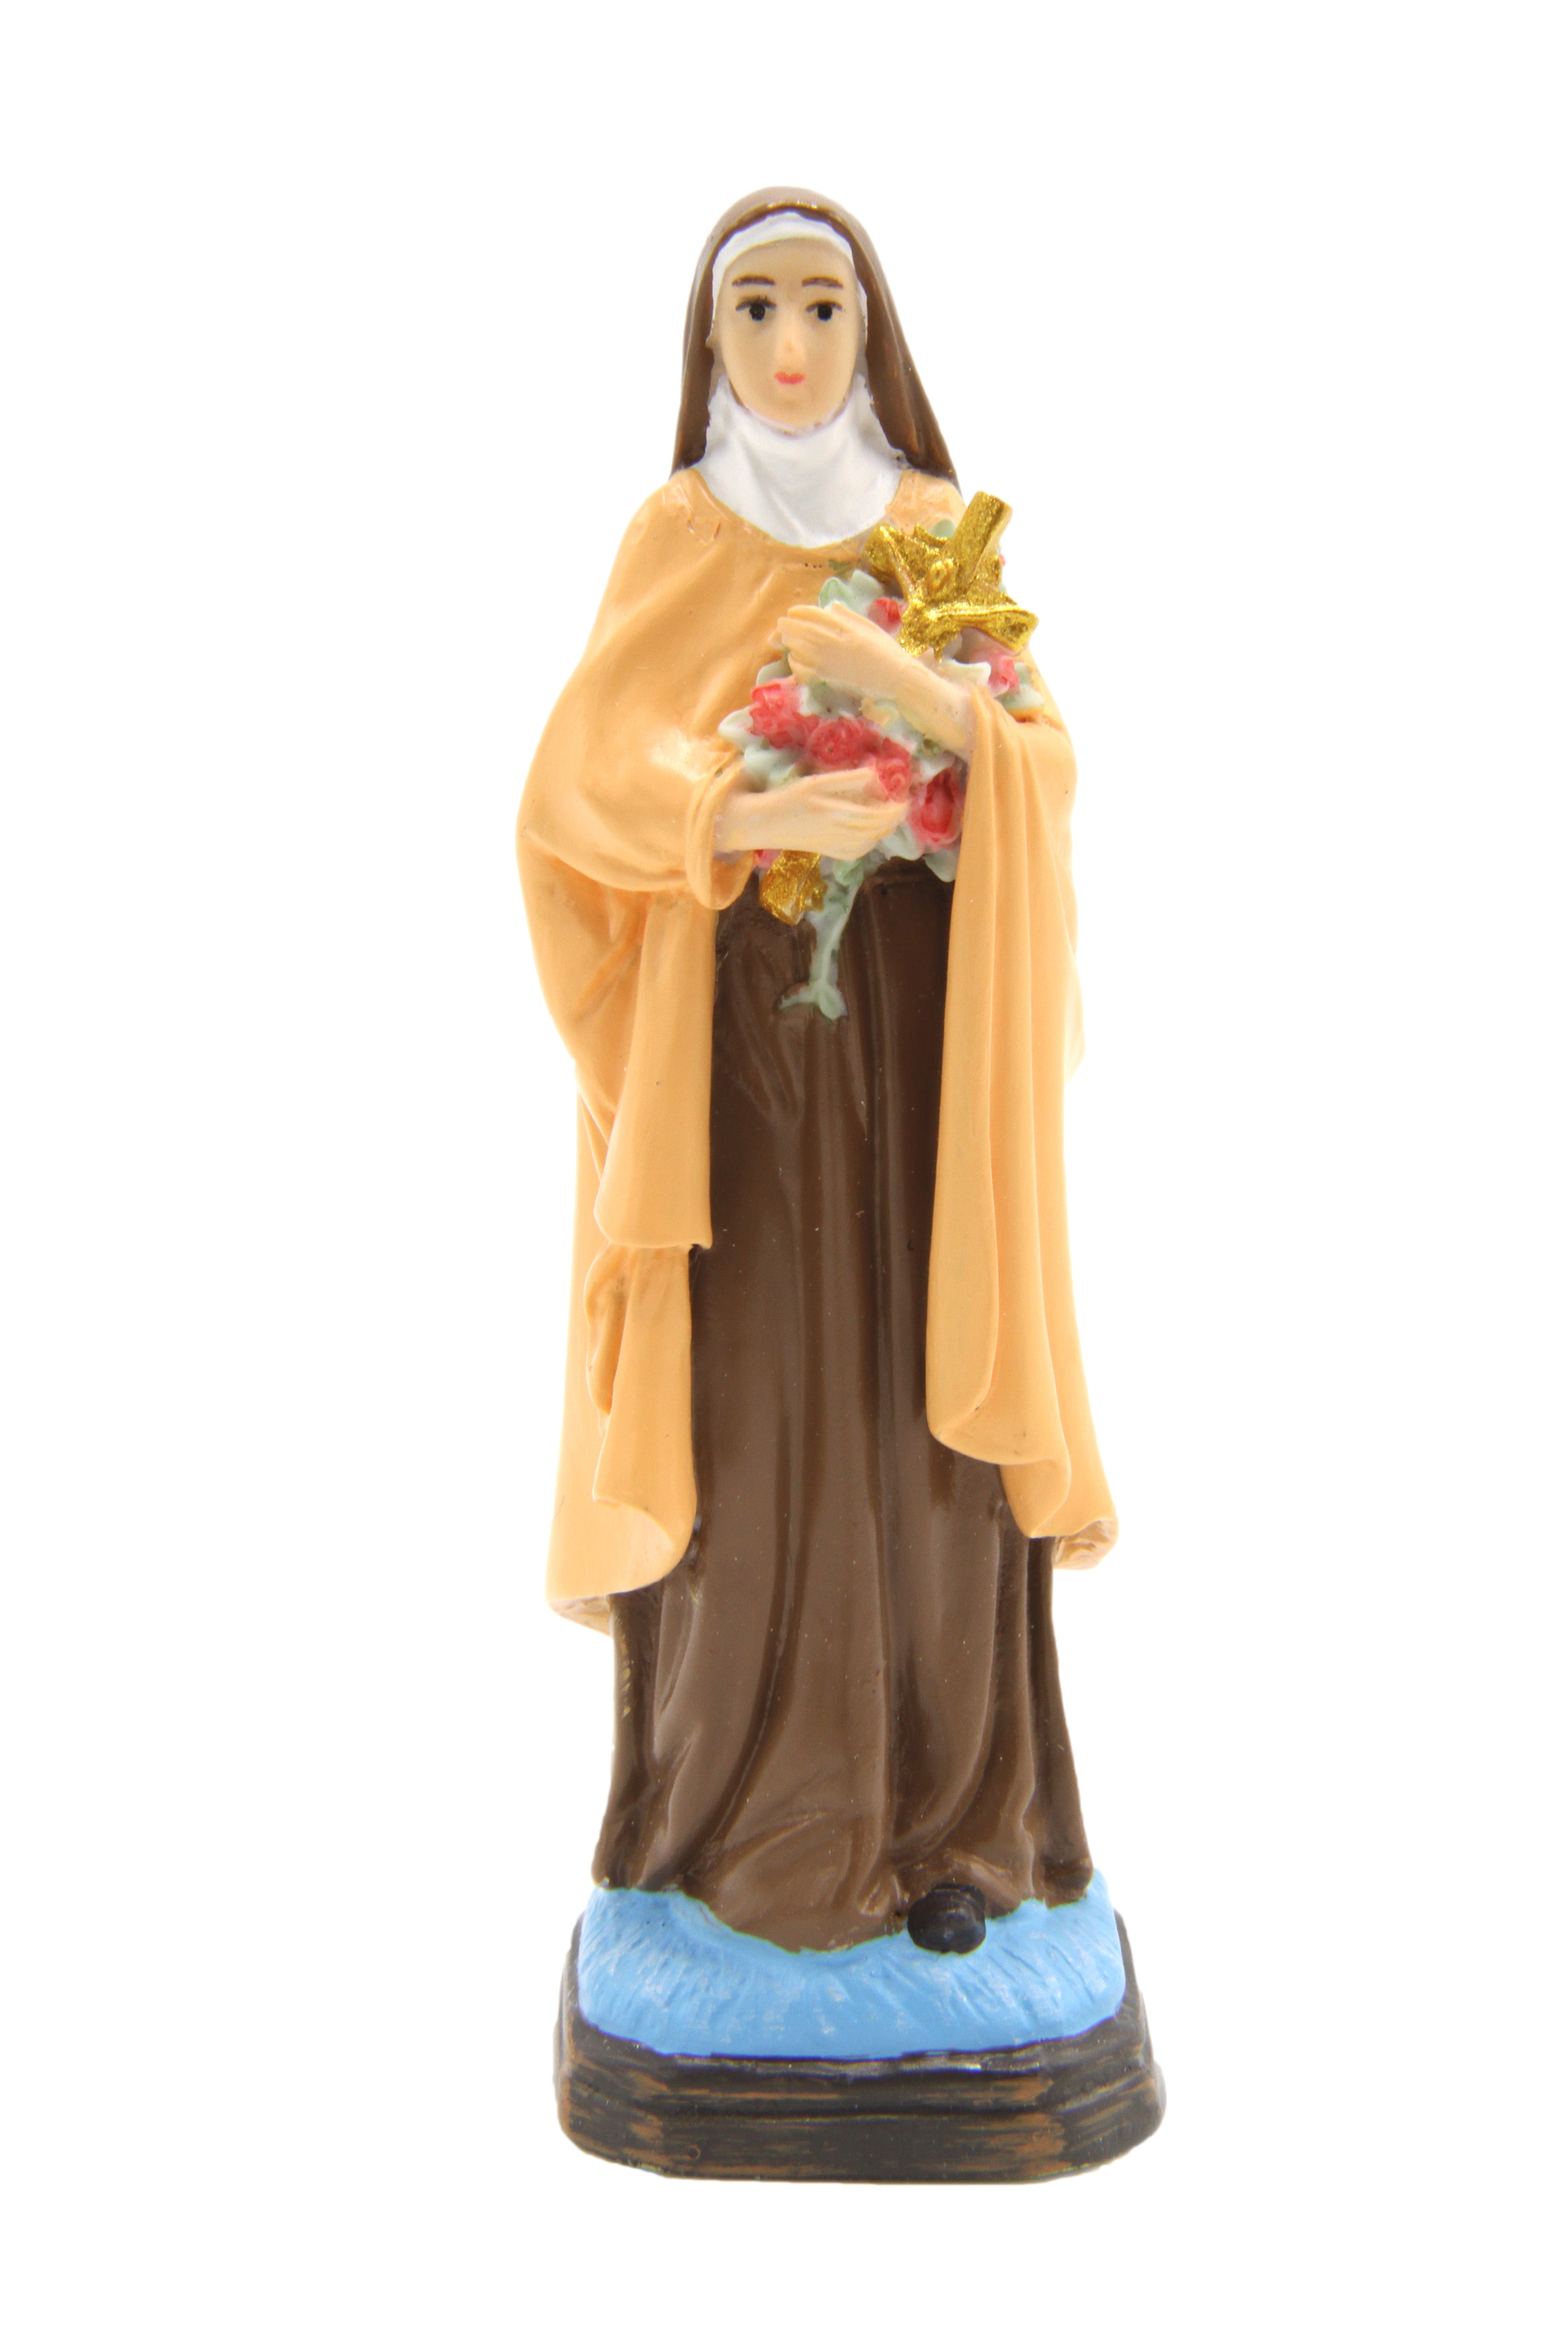 4.25 Inch Saint Therese The Little Flower Catholic Statue Figurine Vittoria Collection